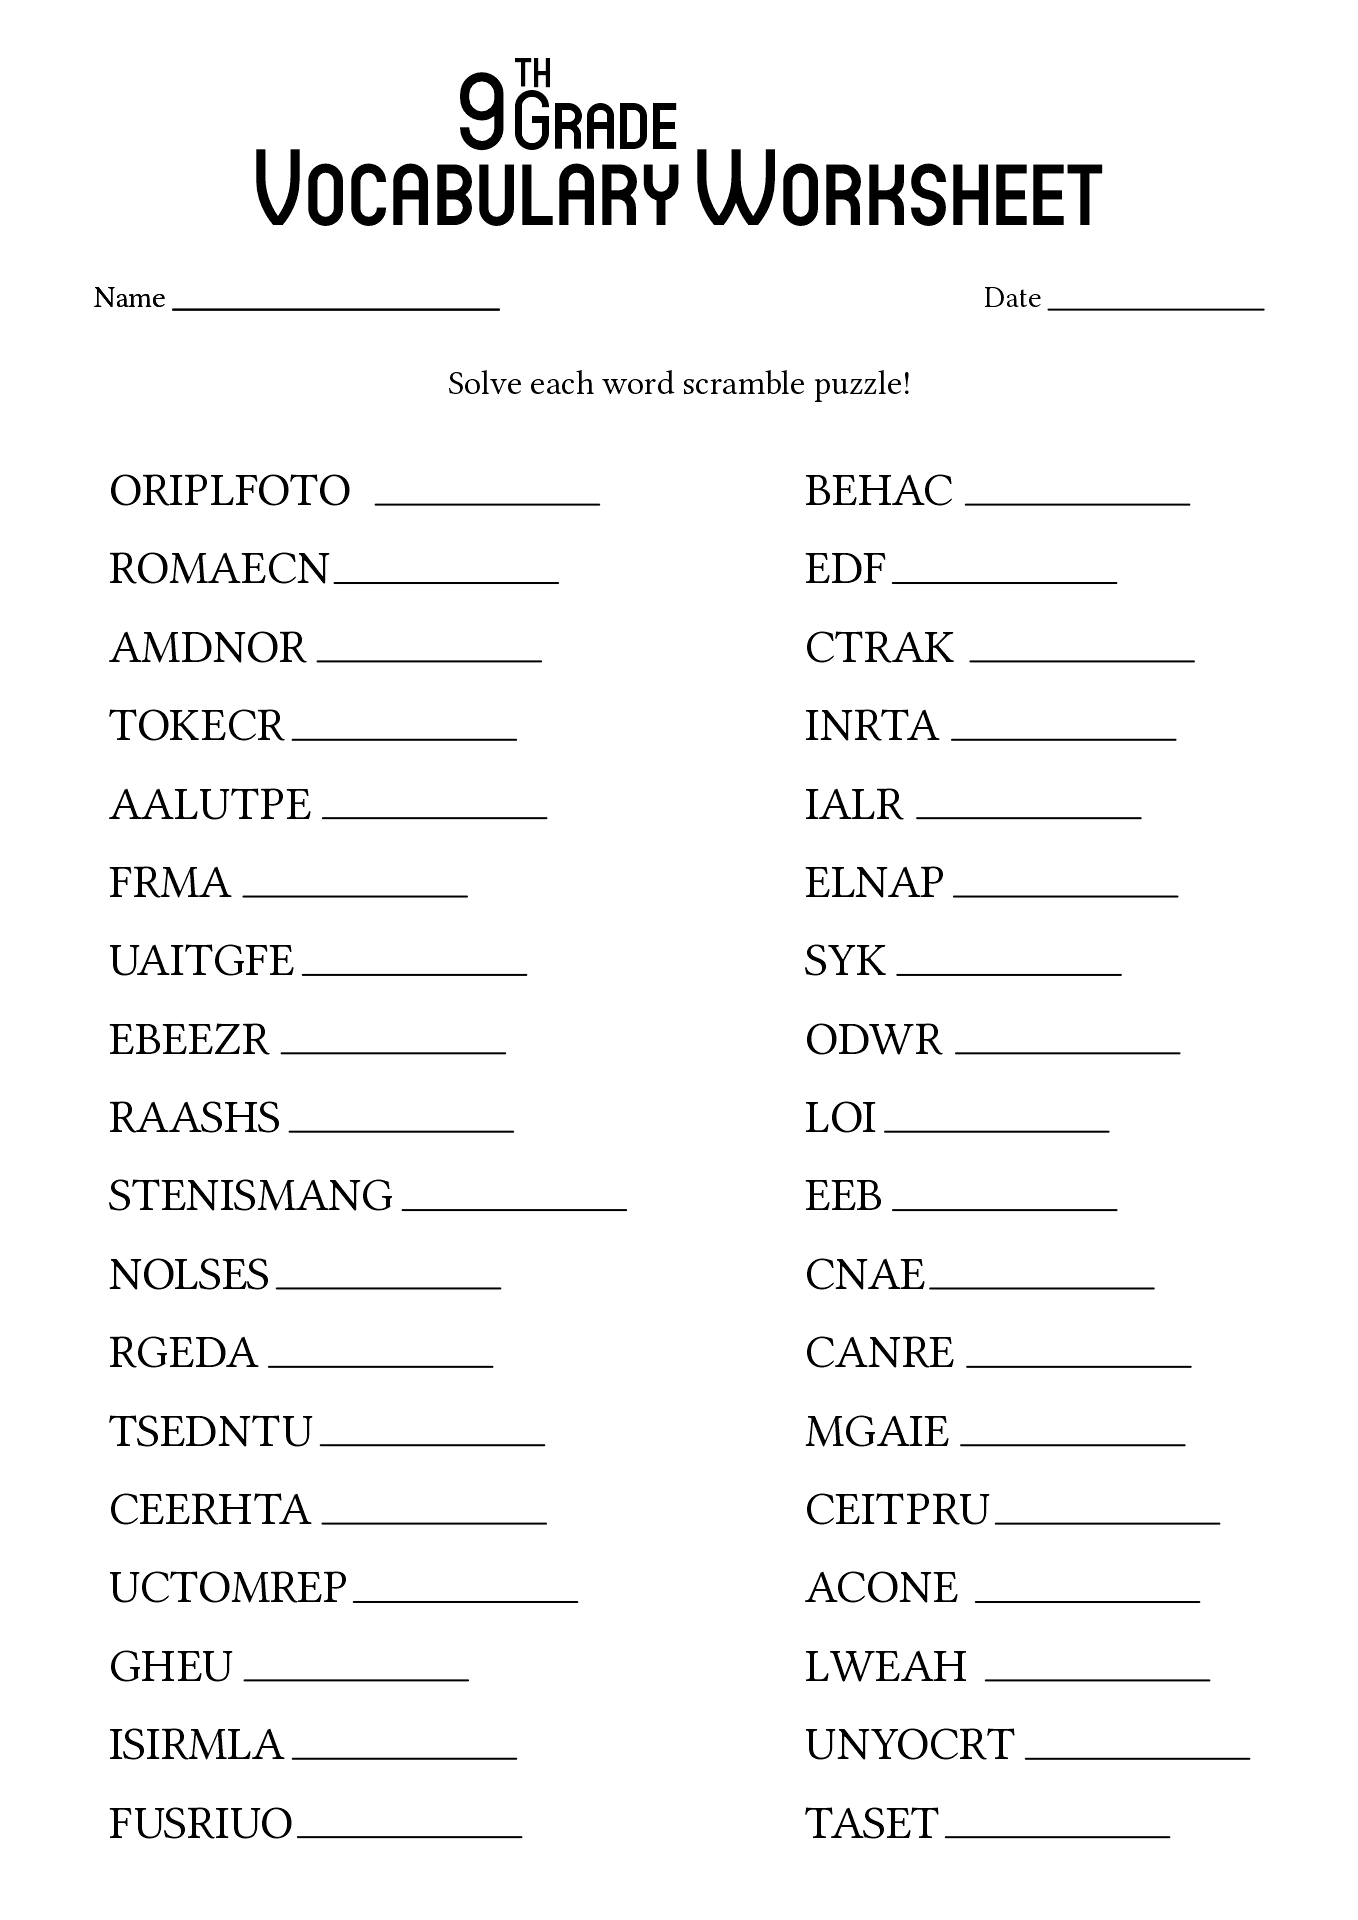 Free 9th Grade Vocabulary Worksheets Image